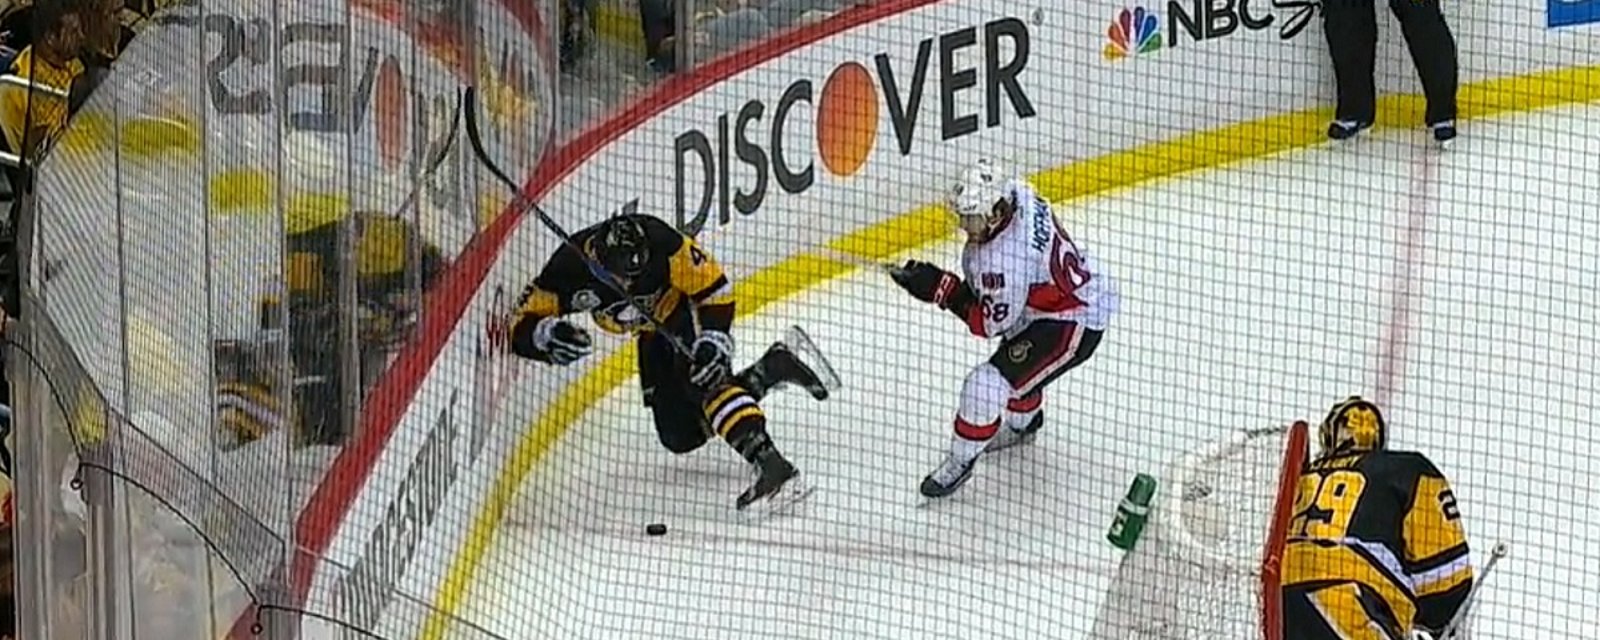 Penguins lose one of their top defenseman after another big hit from Ottawa.